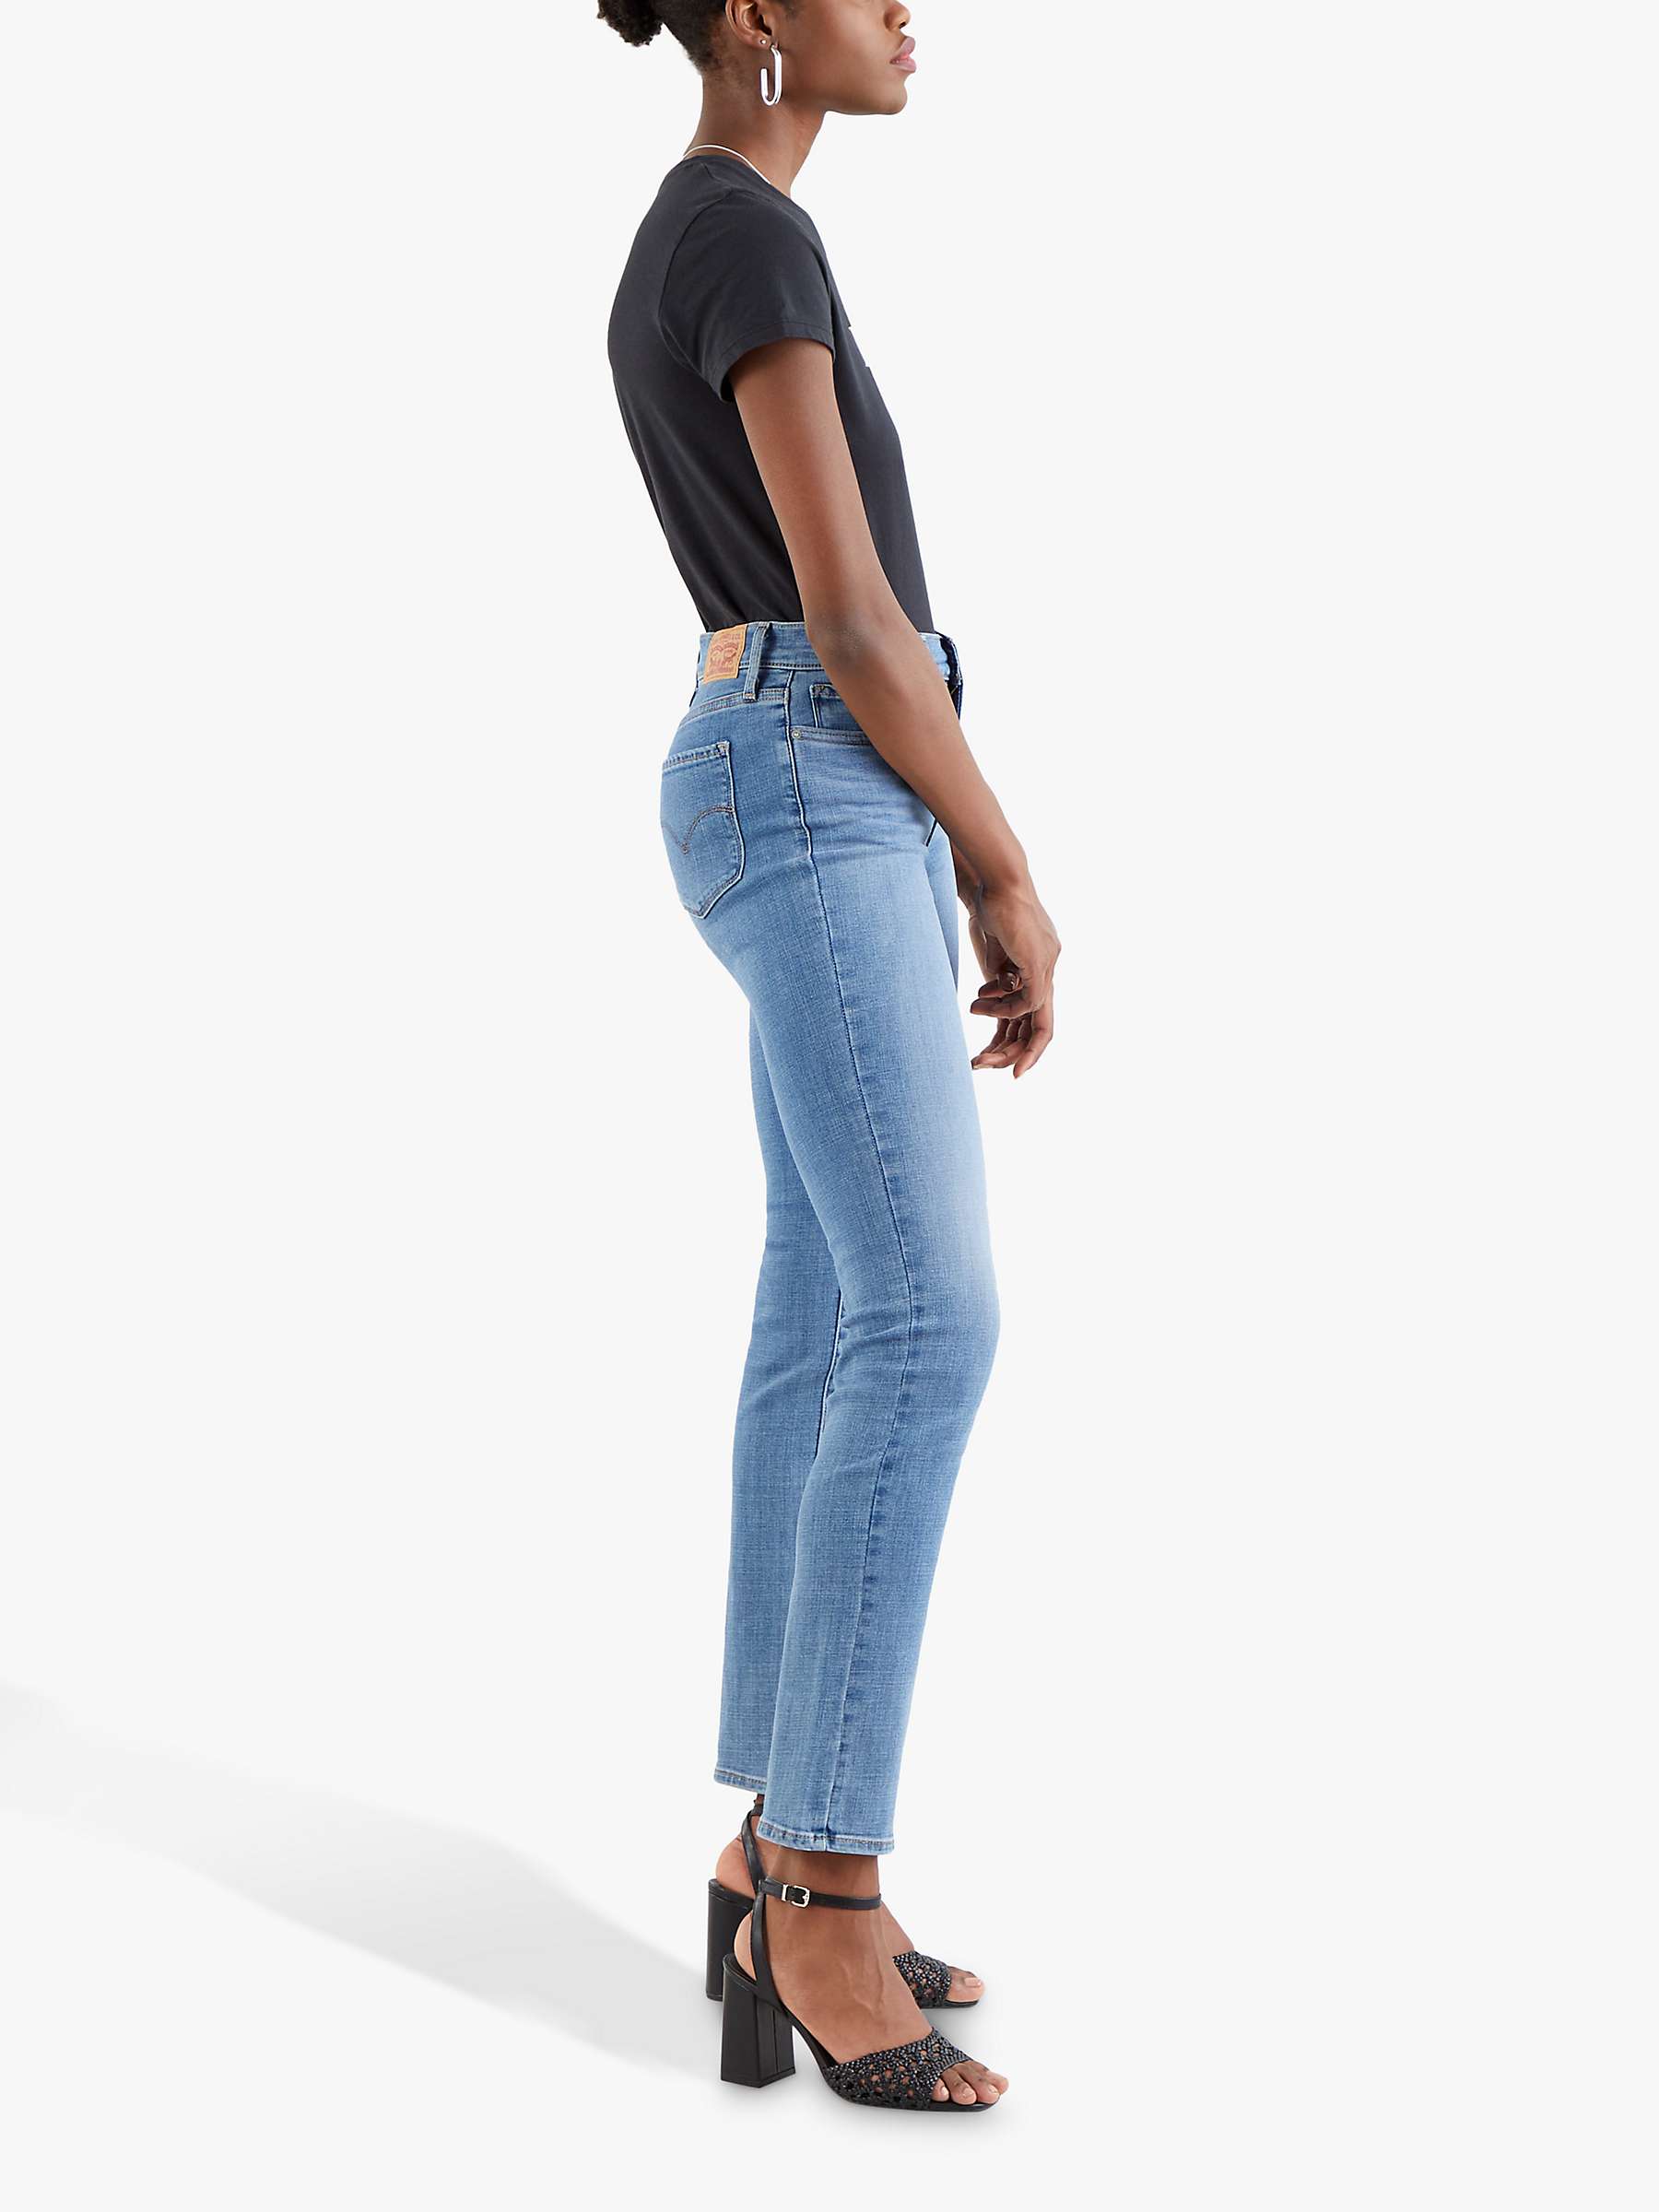 Buy Levi's 314 Shaping Straight Cut Jeans, Slate Mystery Online at johnlewis.com